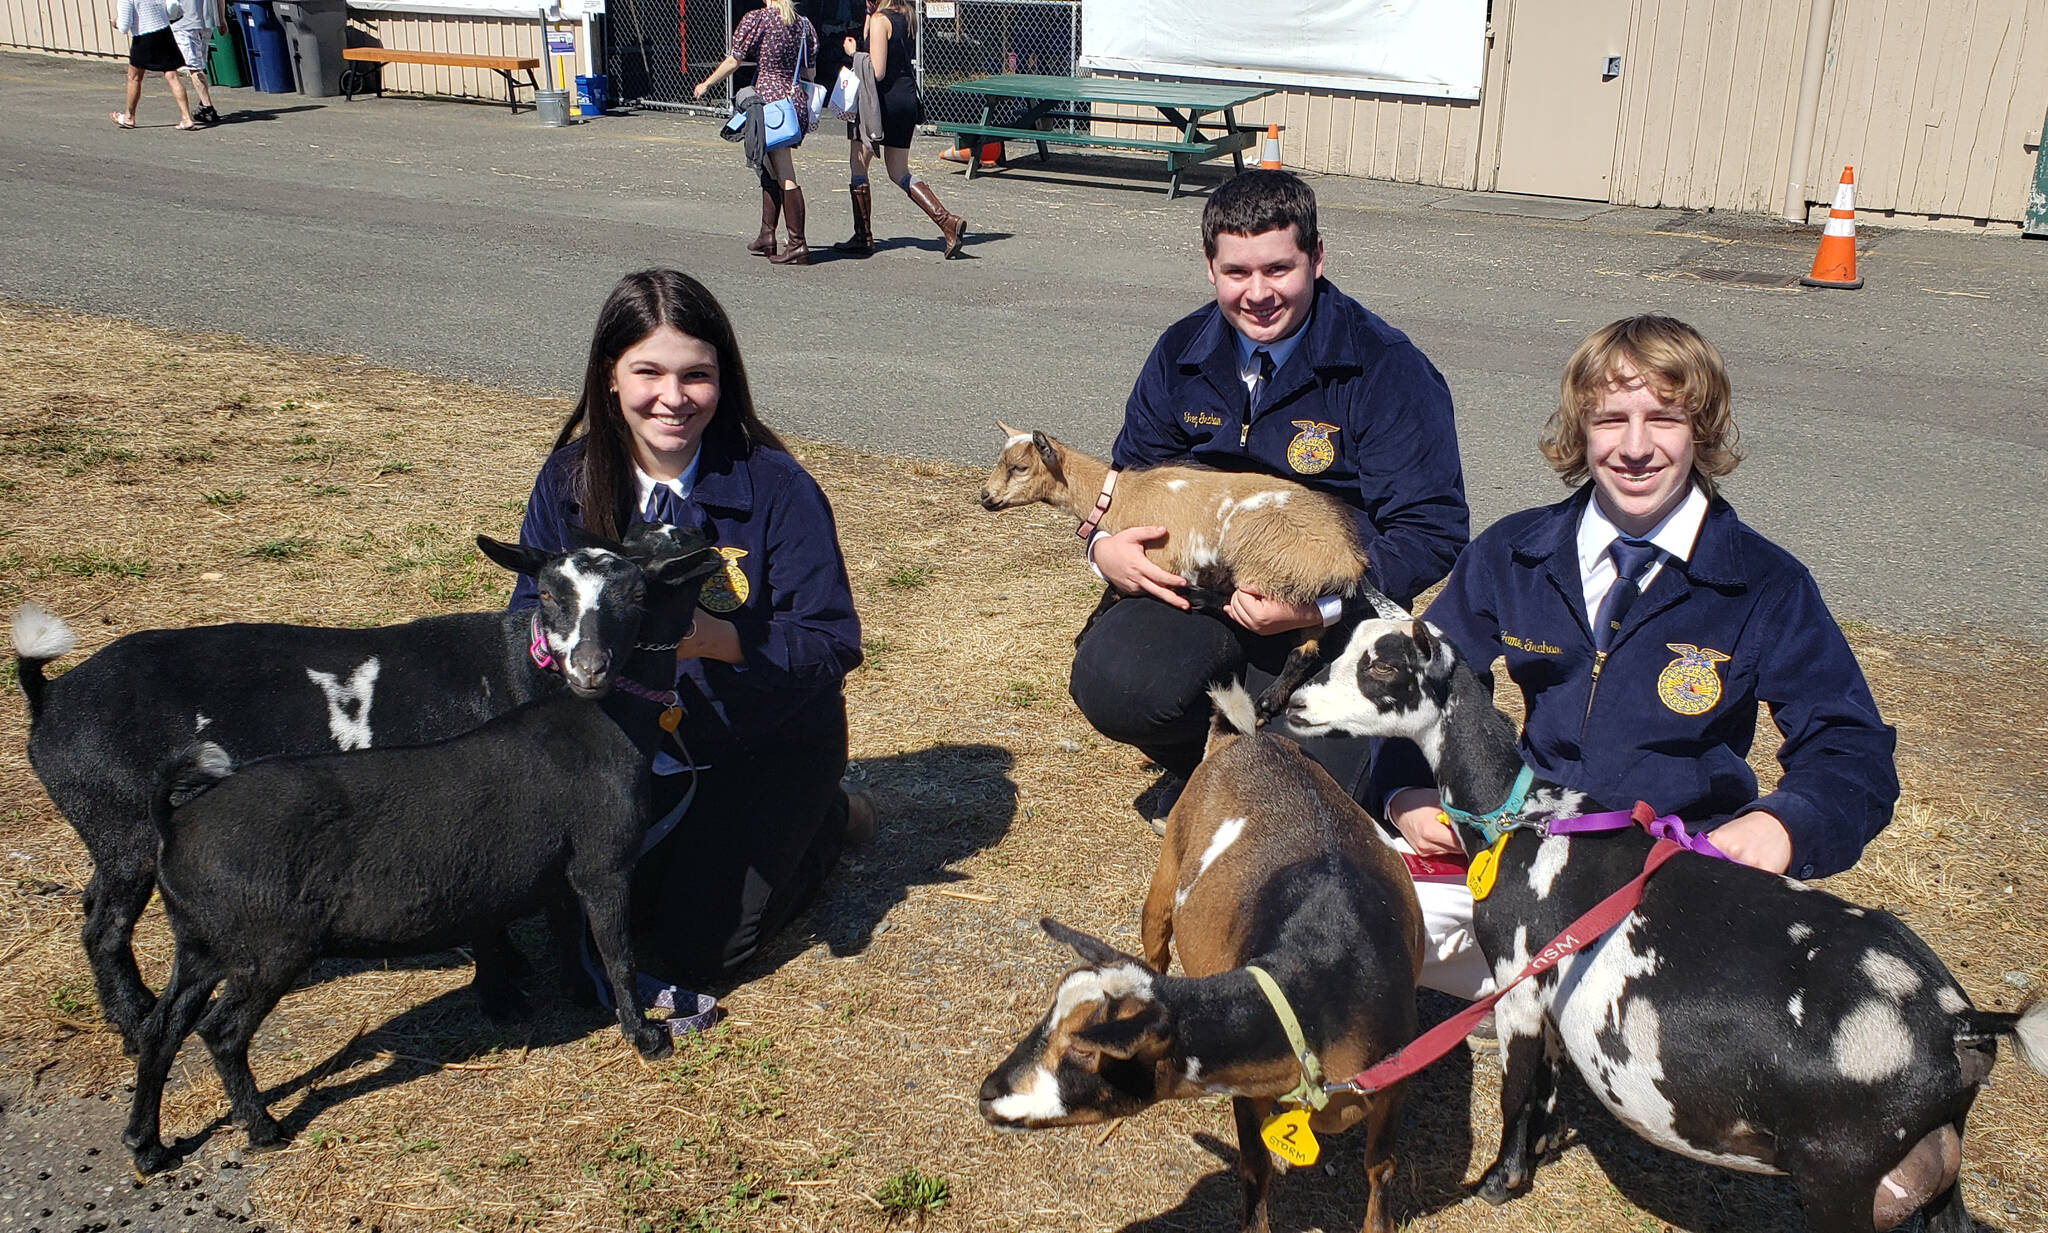 Mount Si FFA students pose with goats, from left Rebecca Glover, Greg Graham, and James Graham. Photo Courtesy of the Snoqualmie Valley School District.